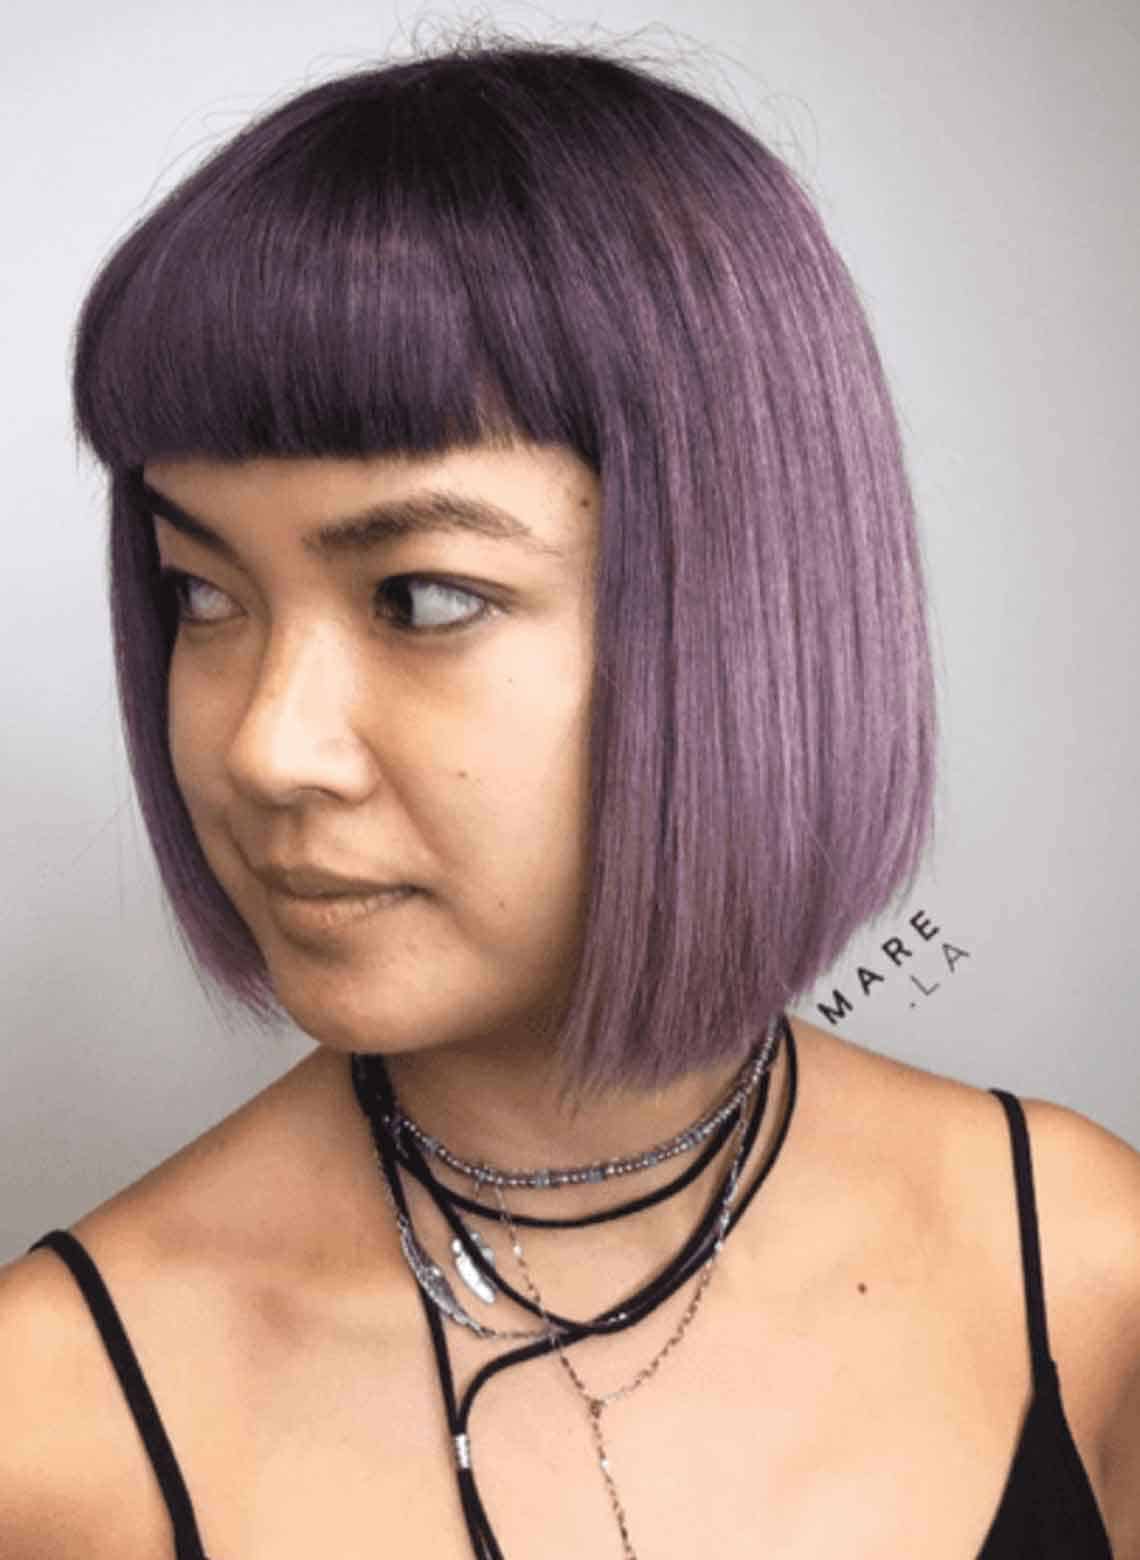 person wearing black tank top, lots of necklaces, with purple hair cut in a blunt bob 